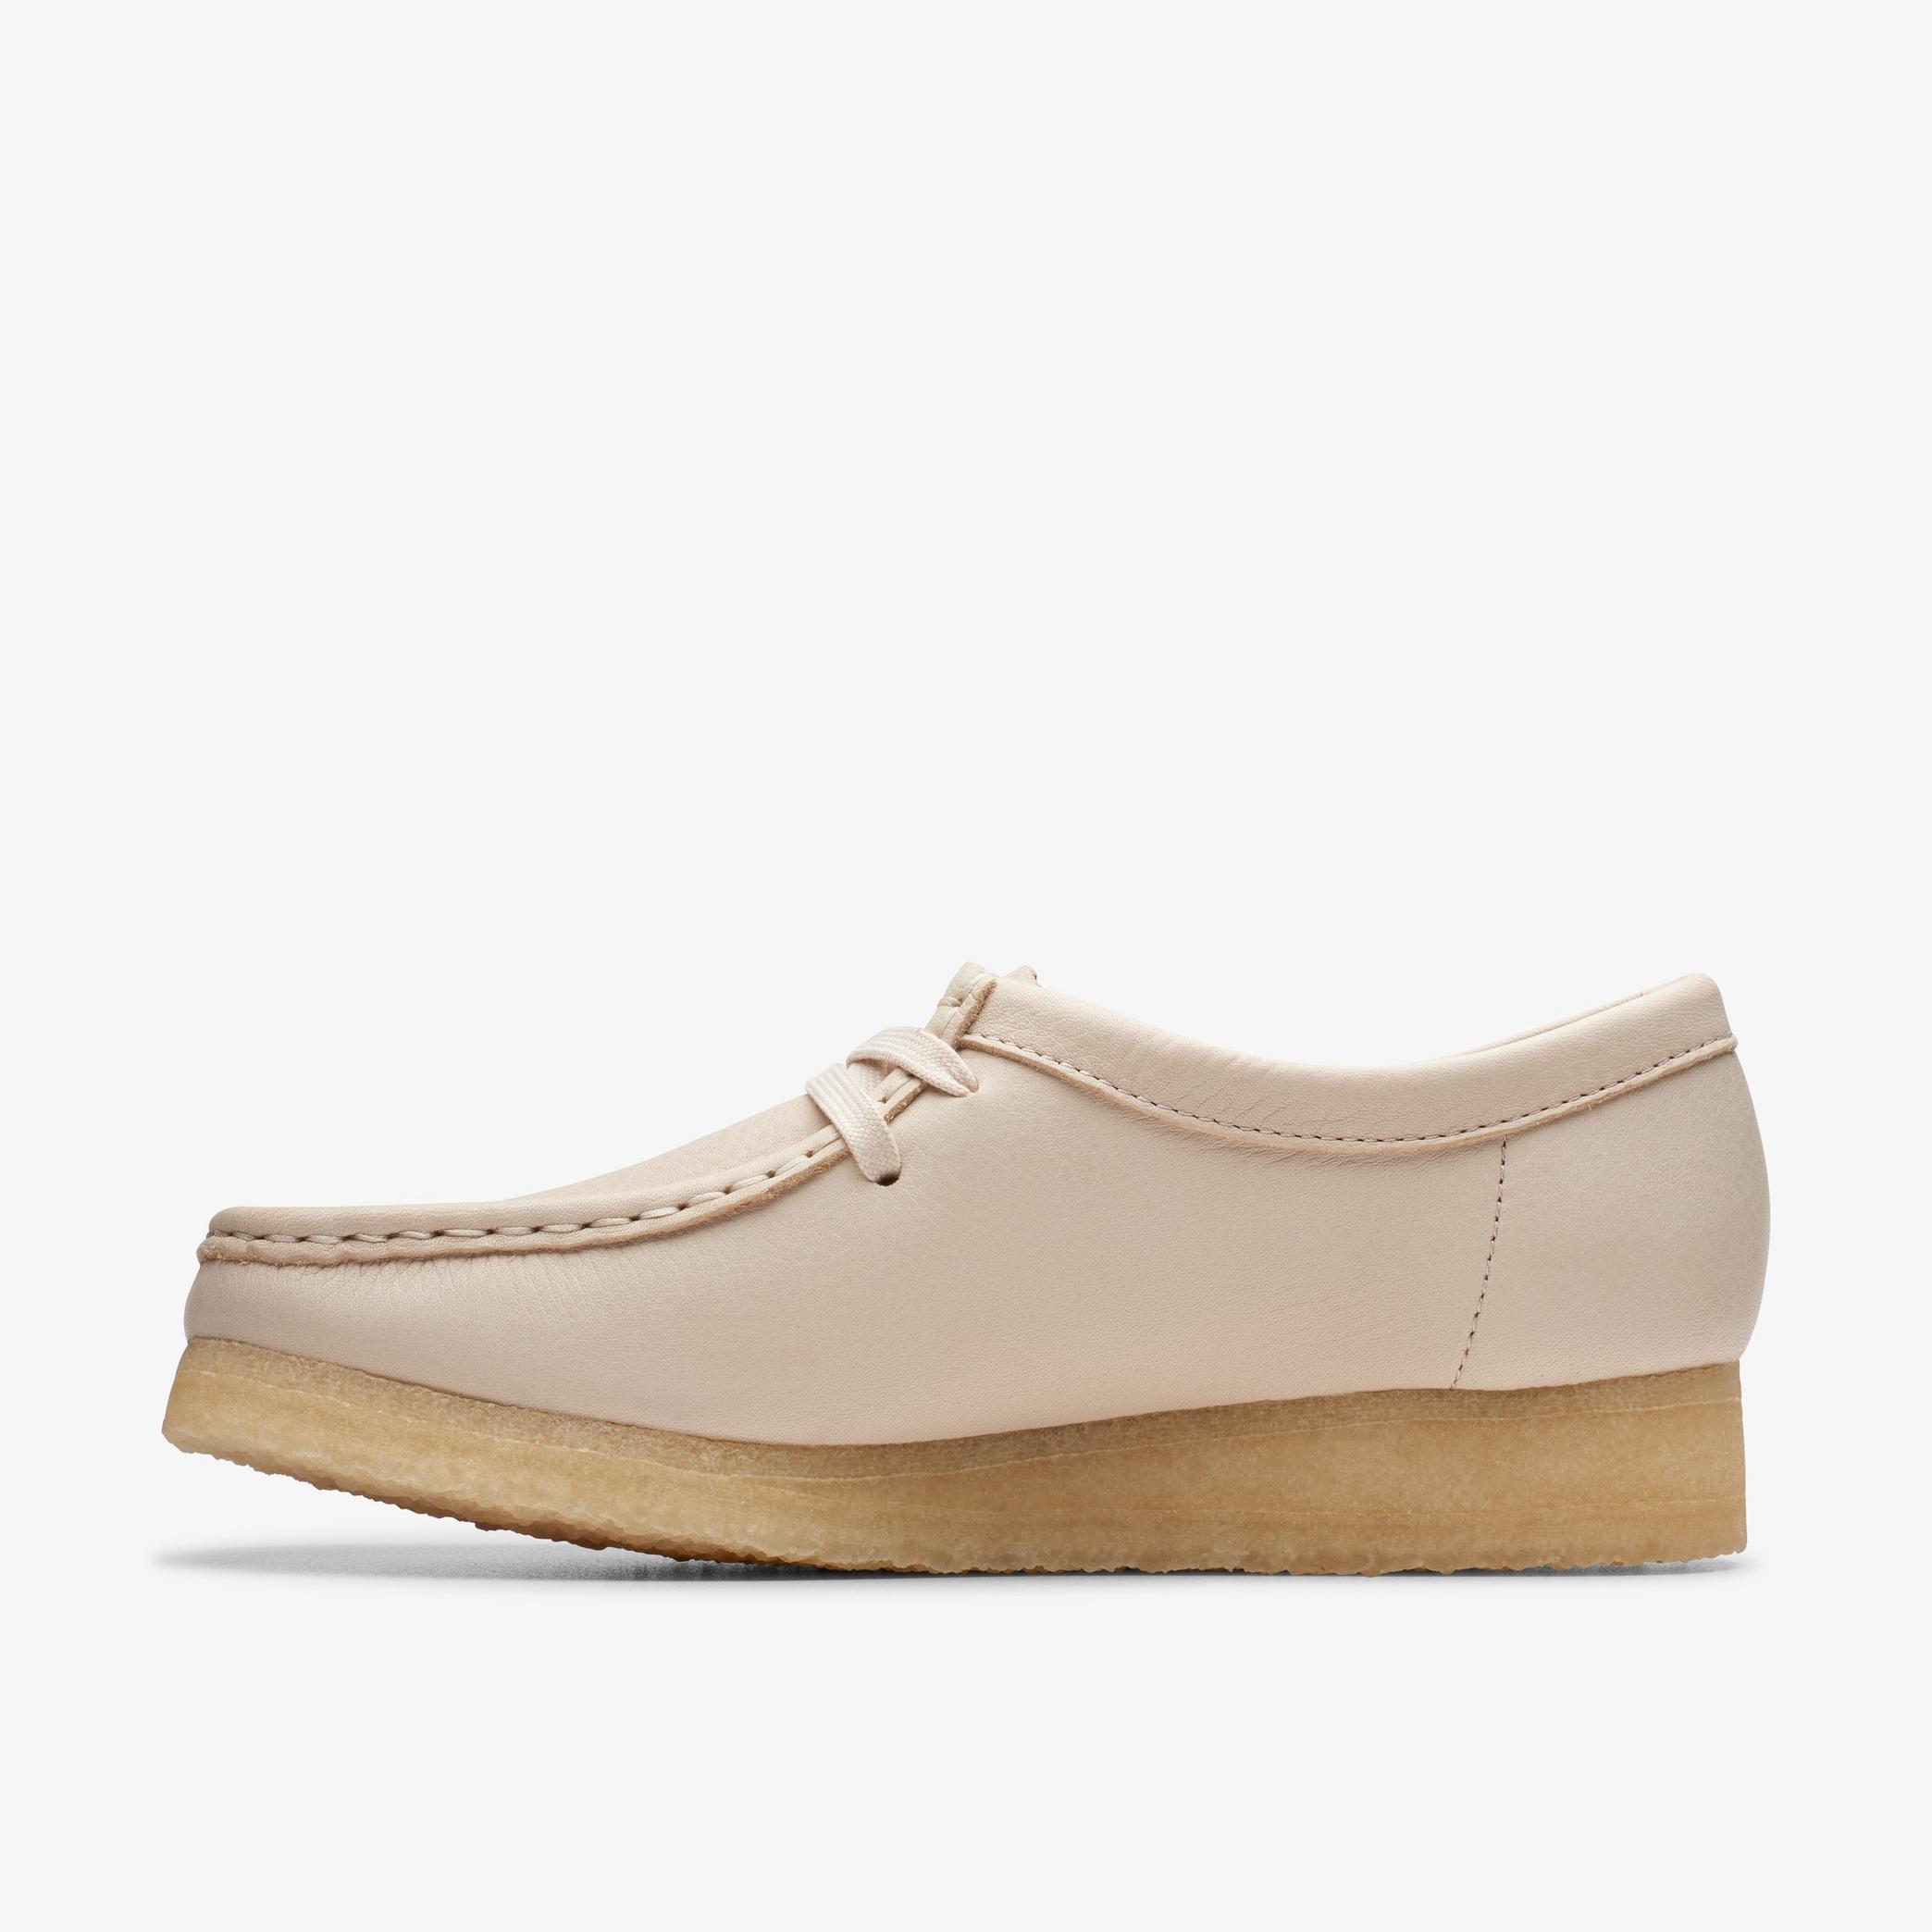 Wallabee Beige Leather Shoes, view 2 of 7